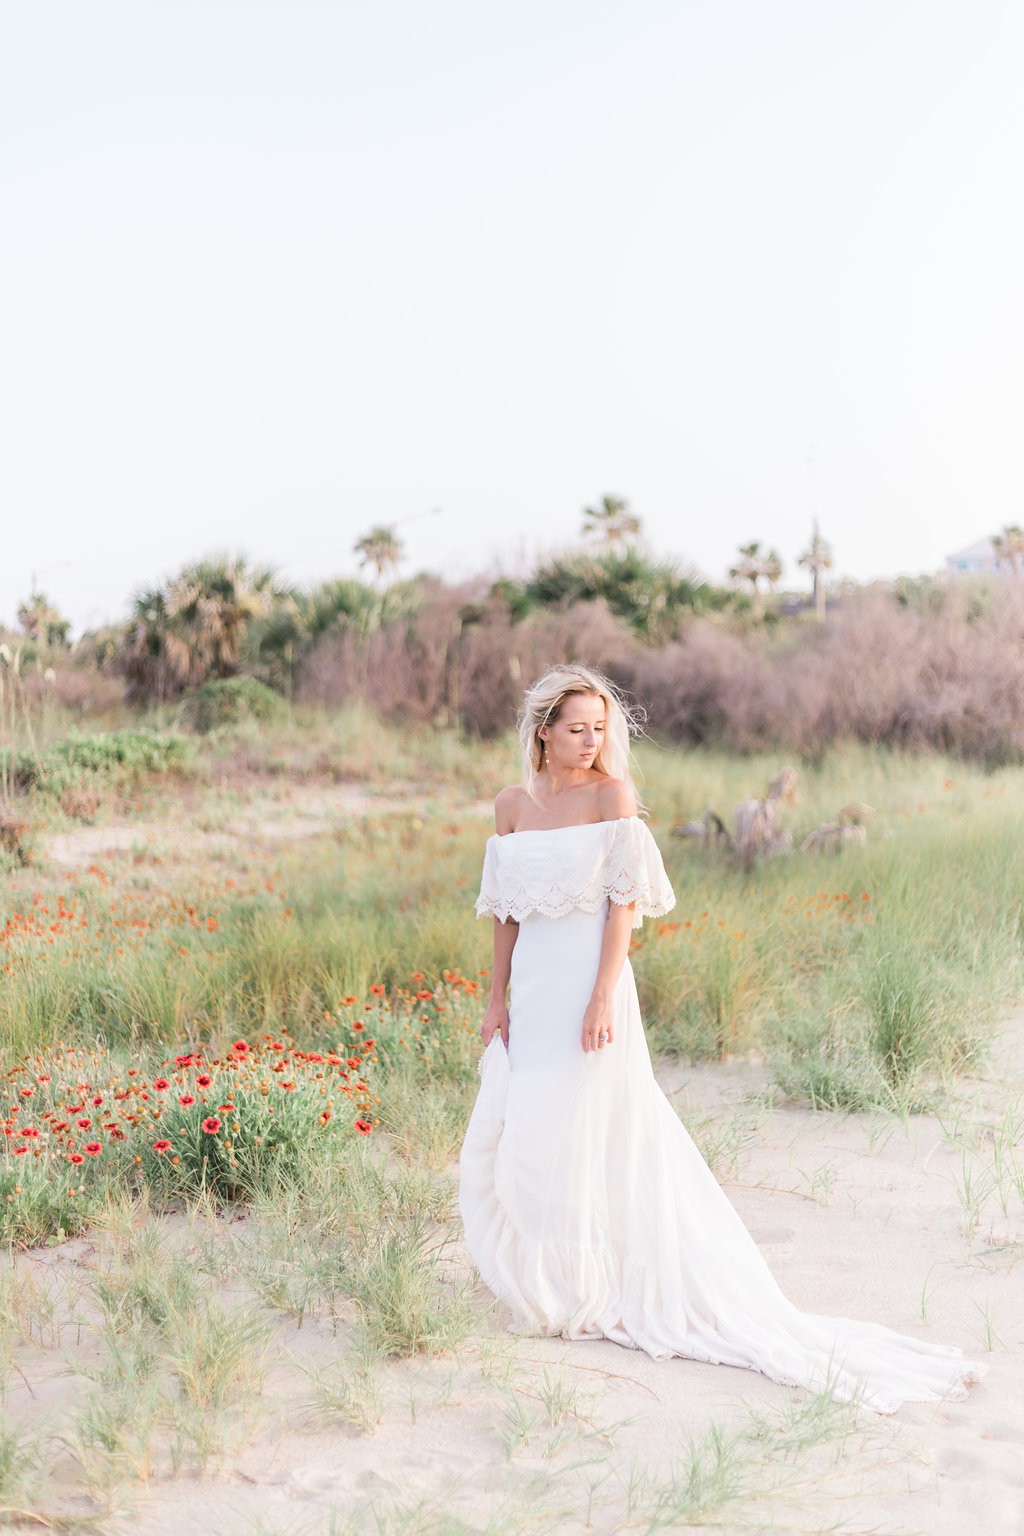 savannah-bridal-shop-last-minute-wedding-planning-details-you-should-start-on-NOW-bluebell-photography-daughters-of-simone-tybee-island-wedding-12.jpg